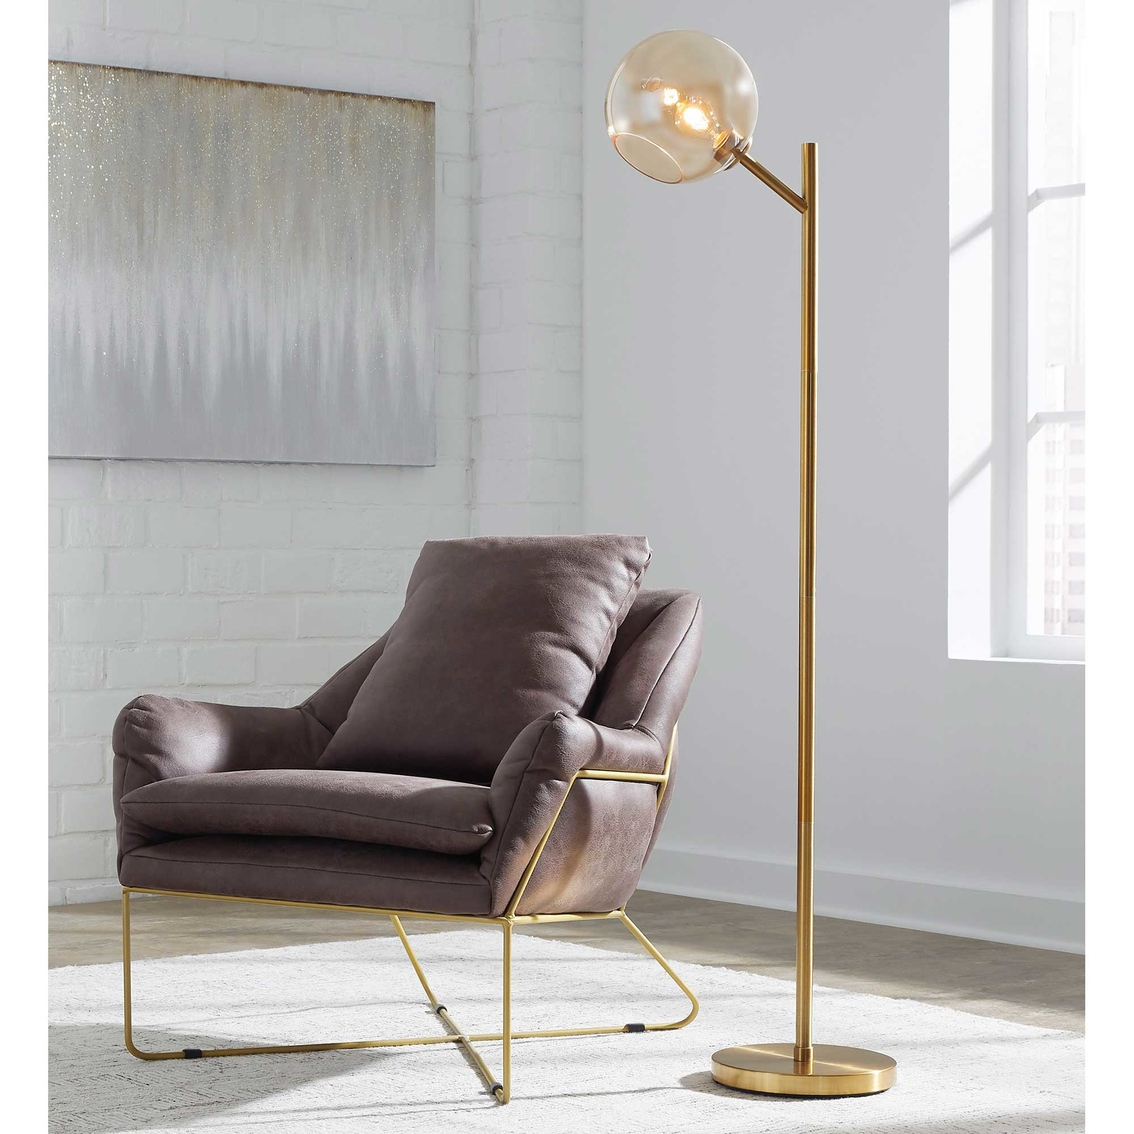 Signature Design by Ashley Abanson 62.5 in. Metal Floor Lamp - Image 2 of 3